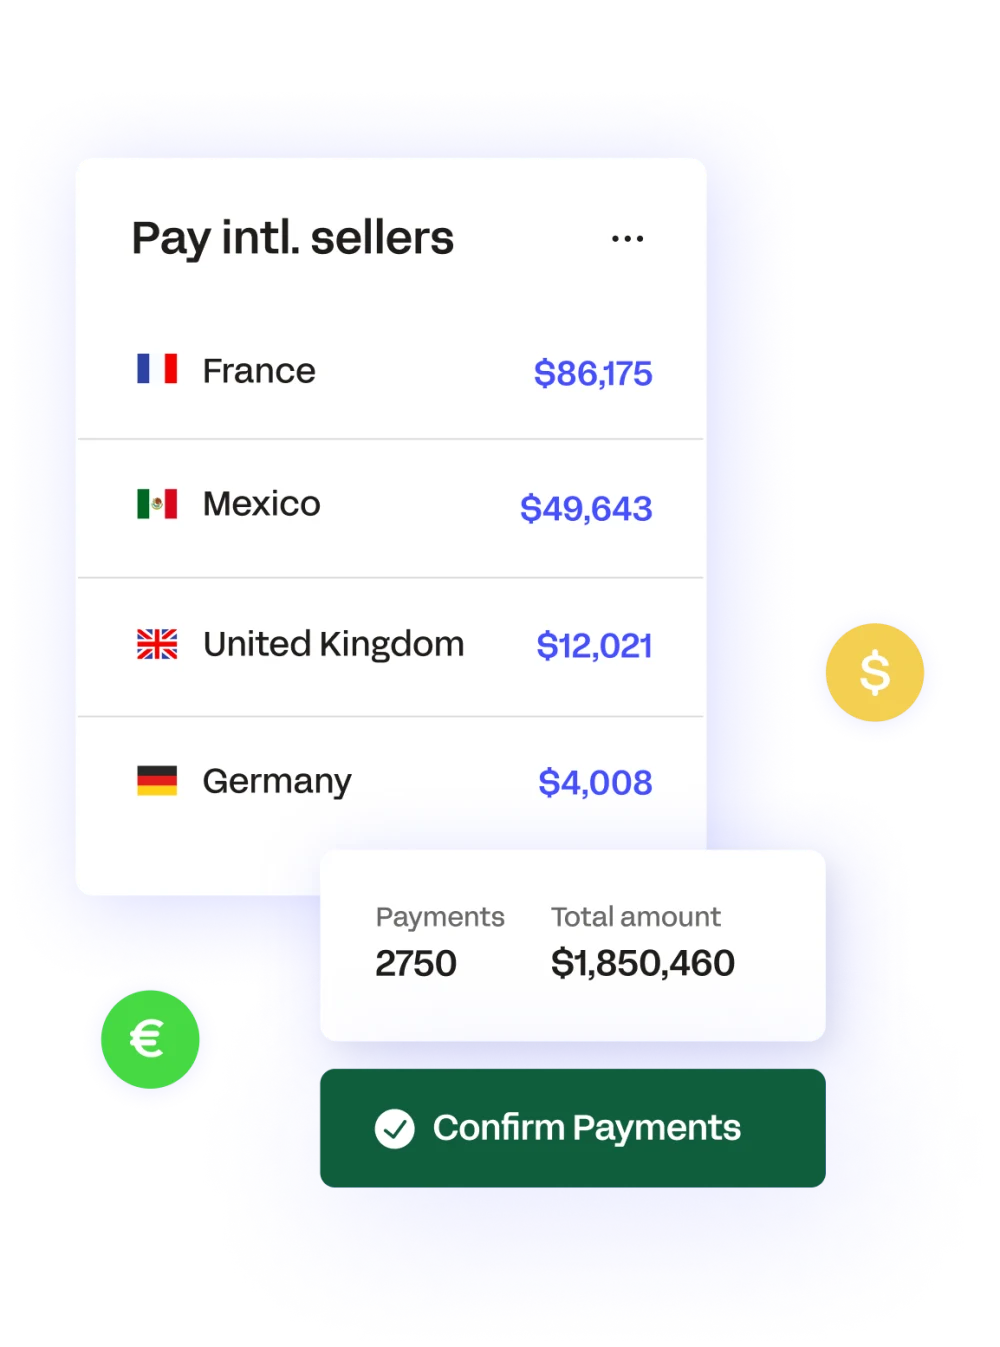 pay international sellers in 220+ countries in their currency